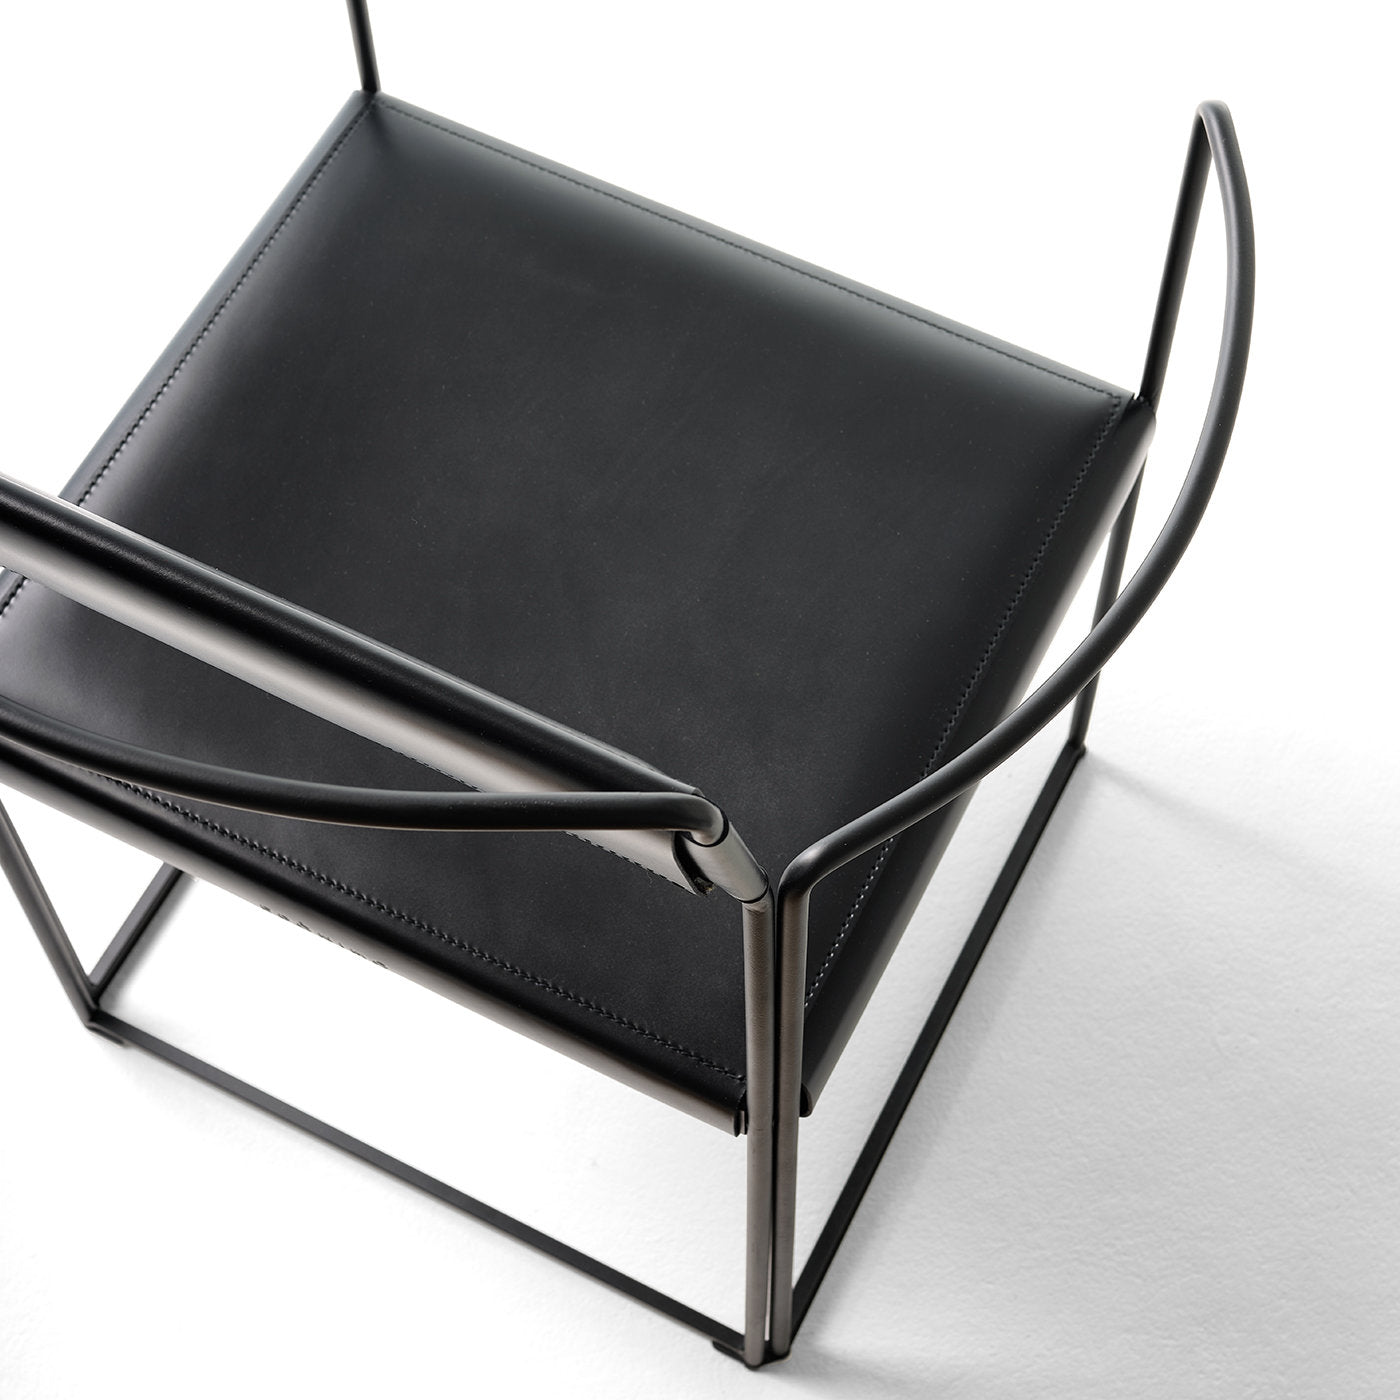 New Outline Black Chair with Armrests by Alberto Colzani - Alternative view 4